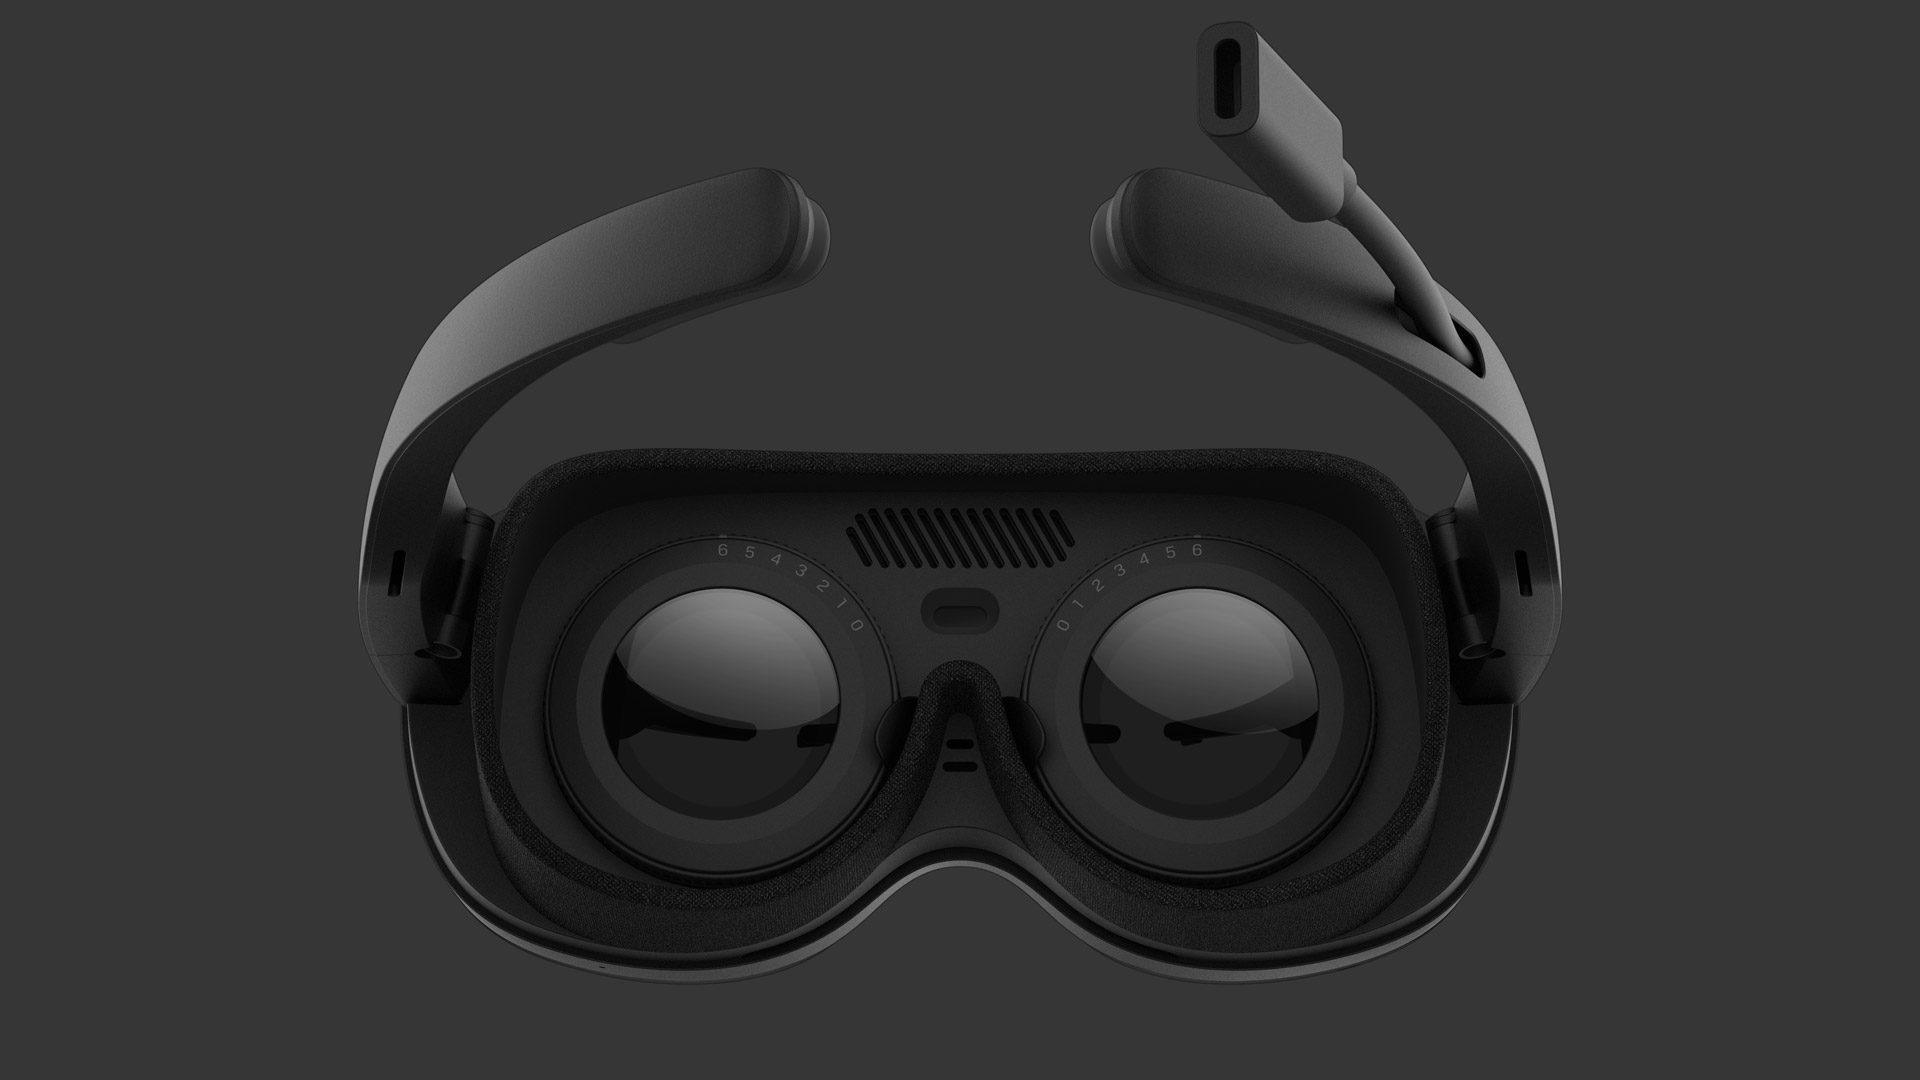 Hands-on review: HTC Vive Flow headset